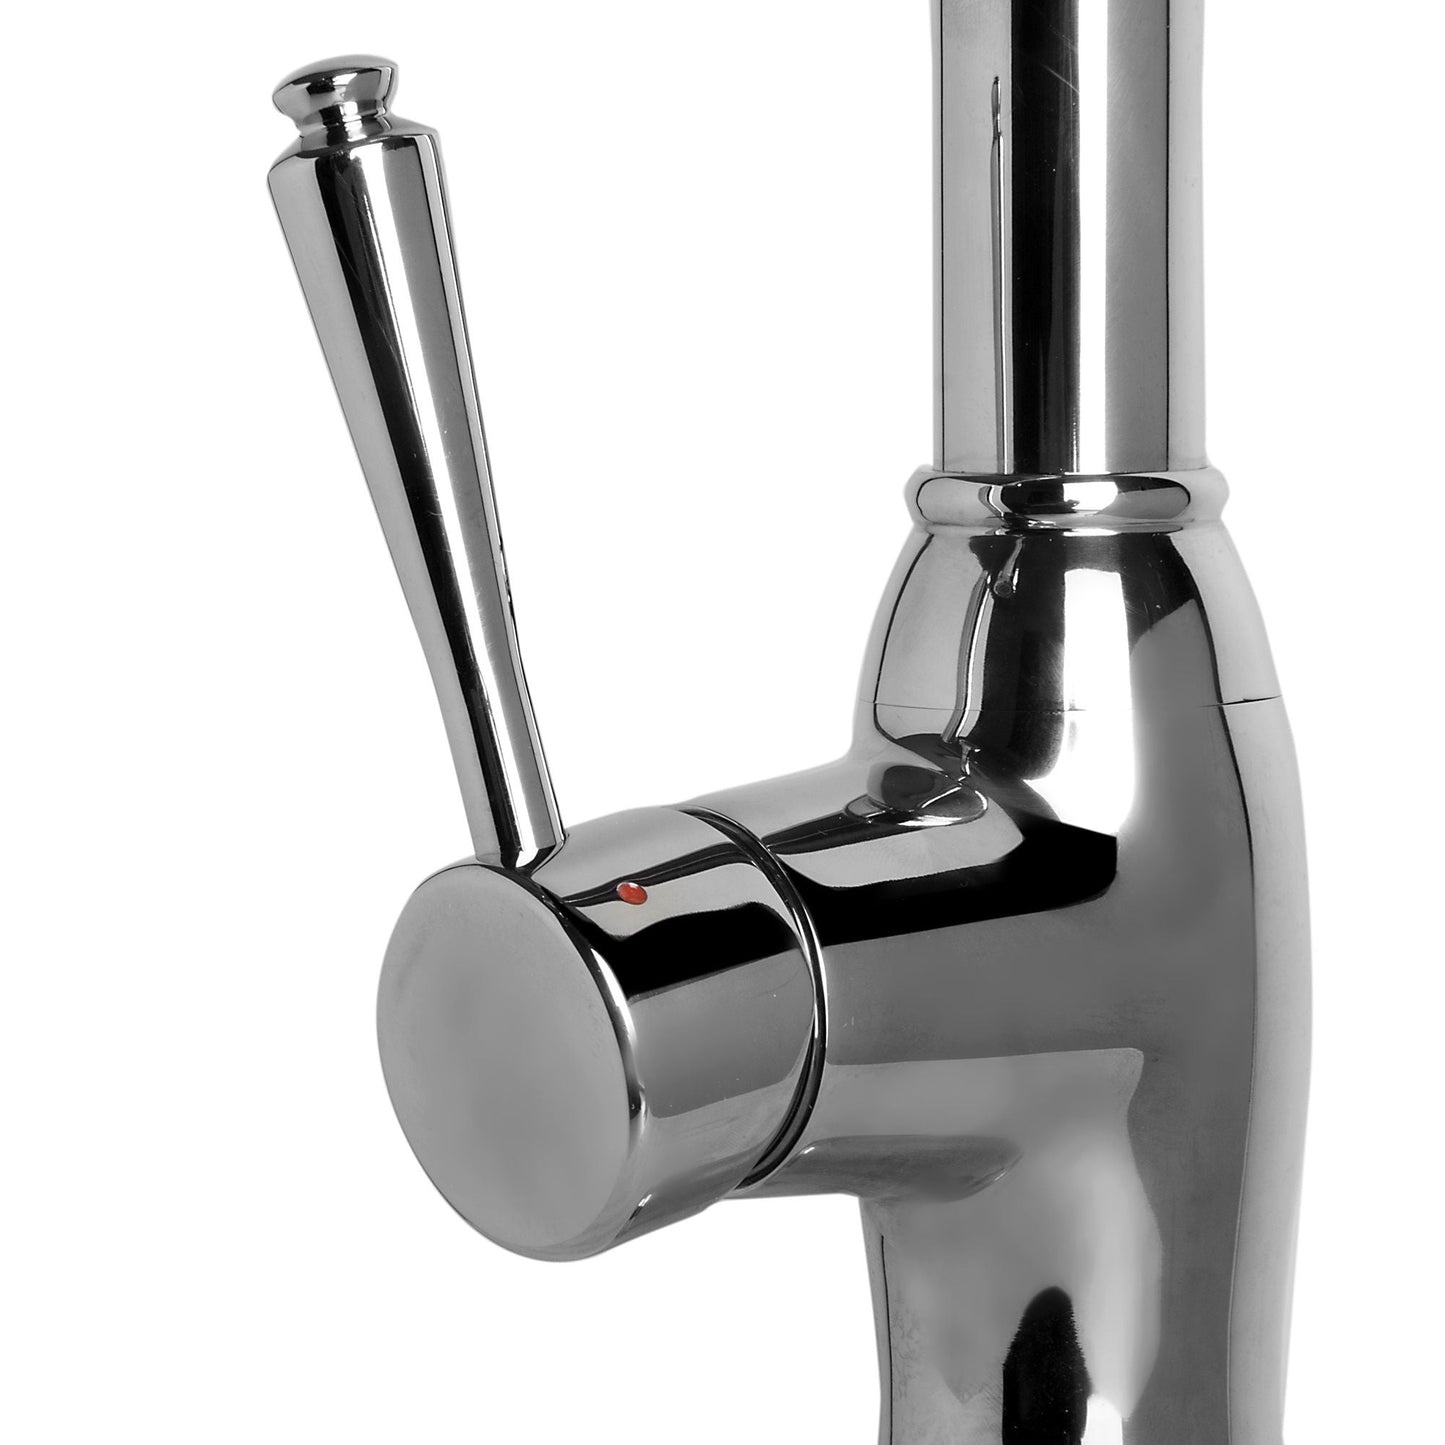 ALFI Brand AB2043-PSS Traditional Solid Polished Stainless Steel Pull Down Kitchen Faucet